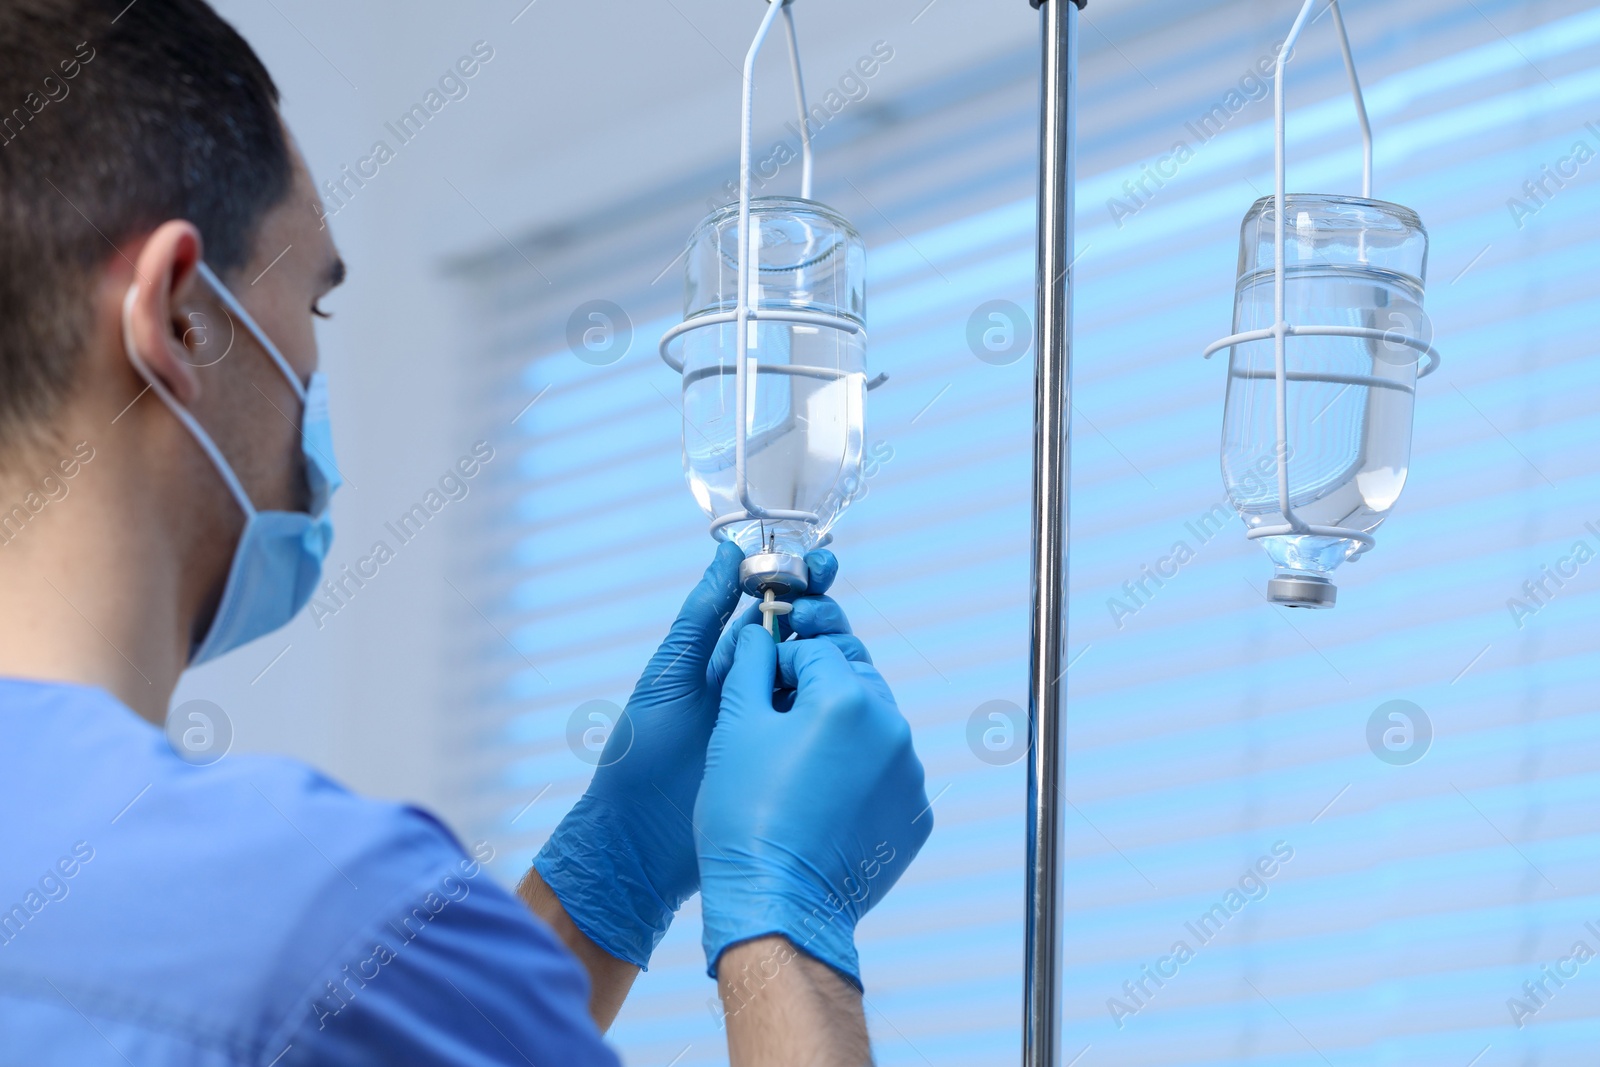 Photo of Nurse setting up IV drip in hospital, selective focus